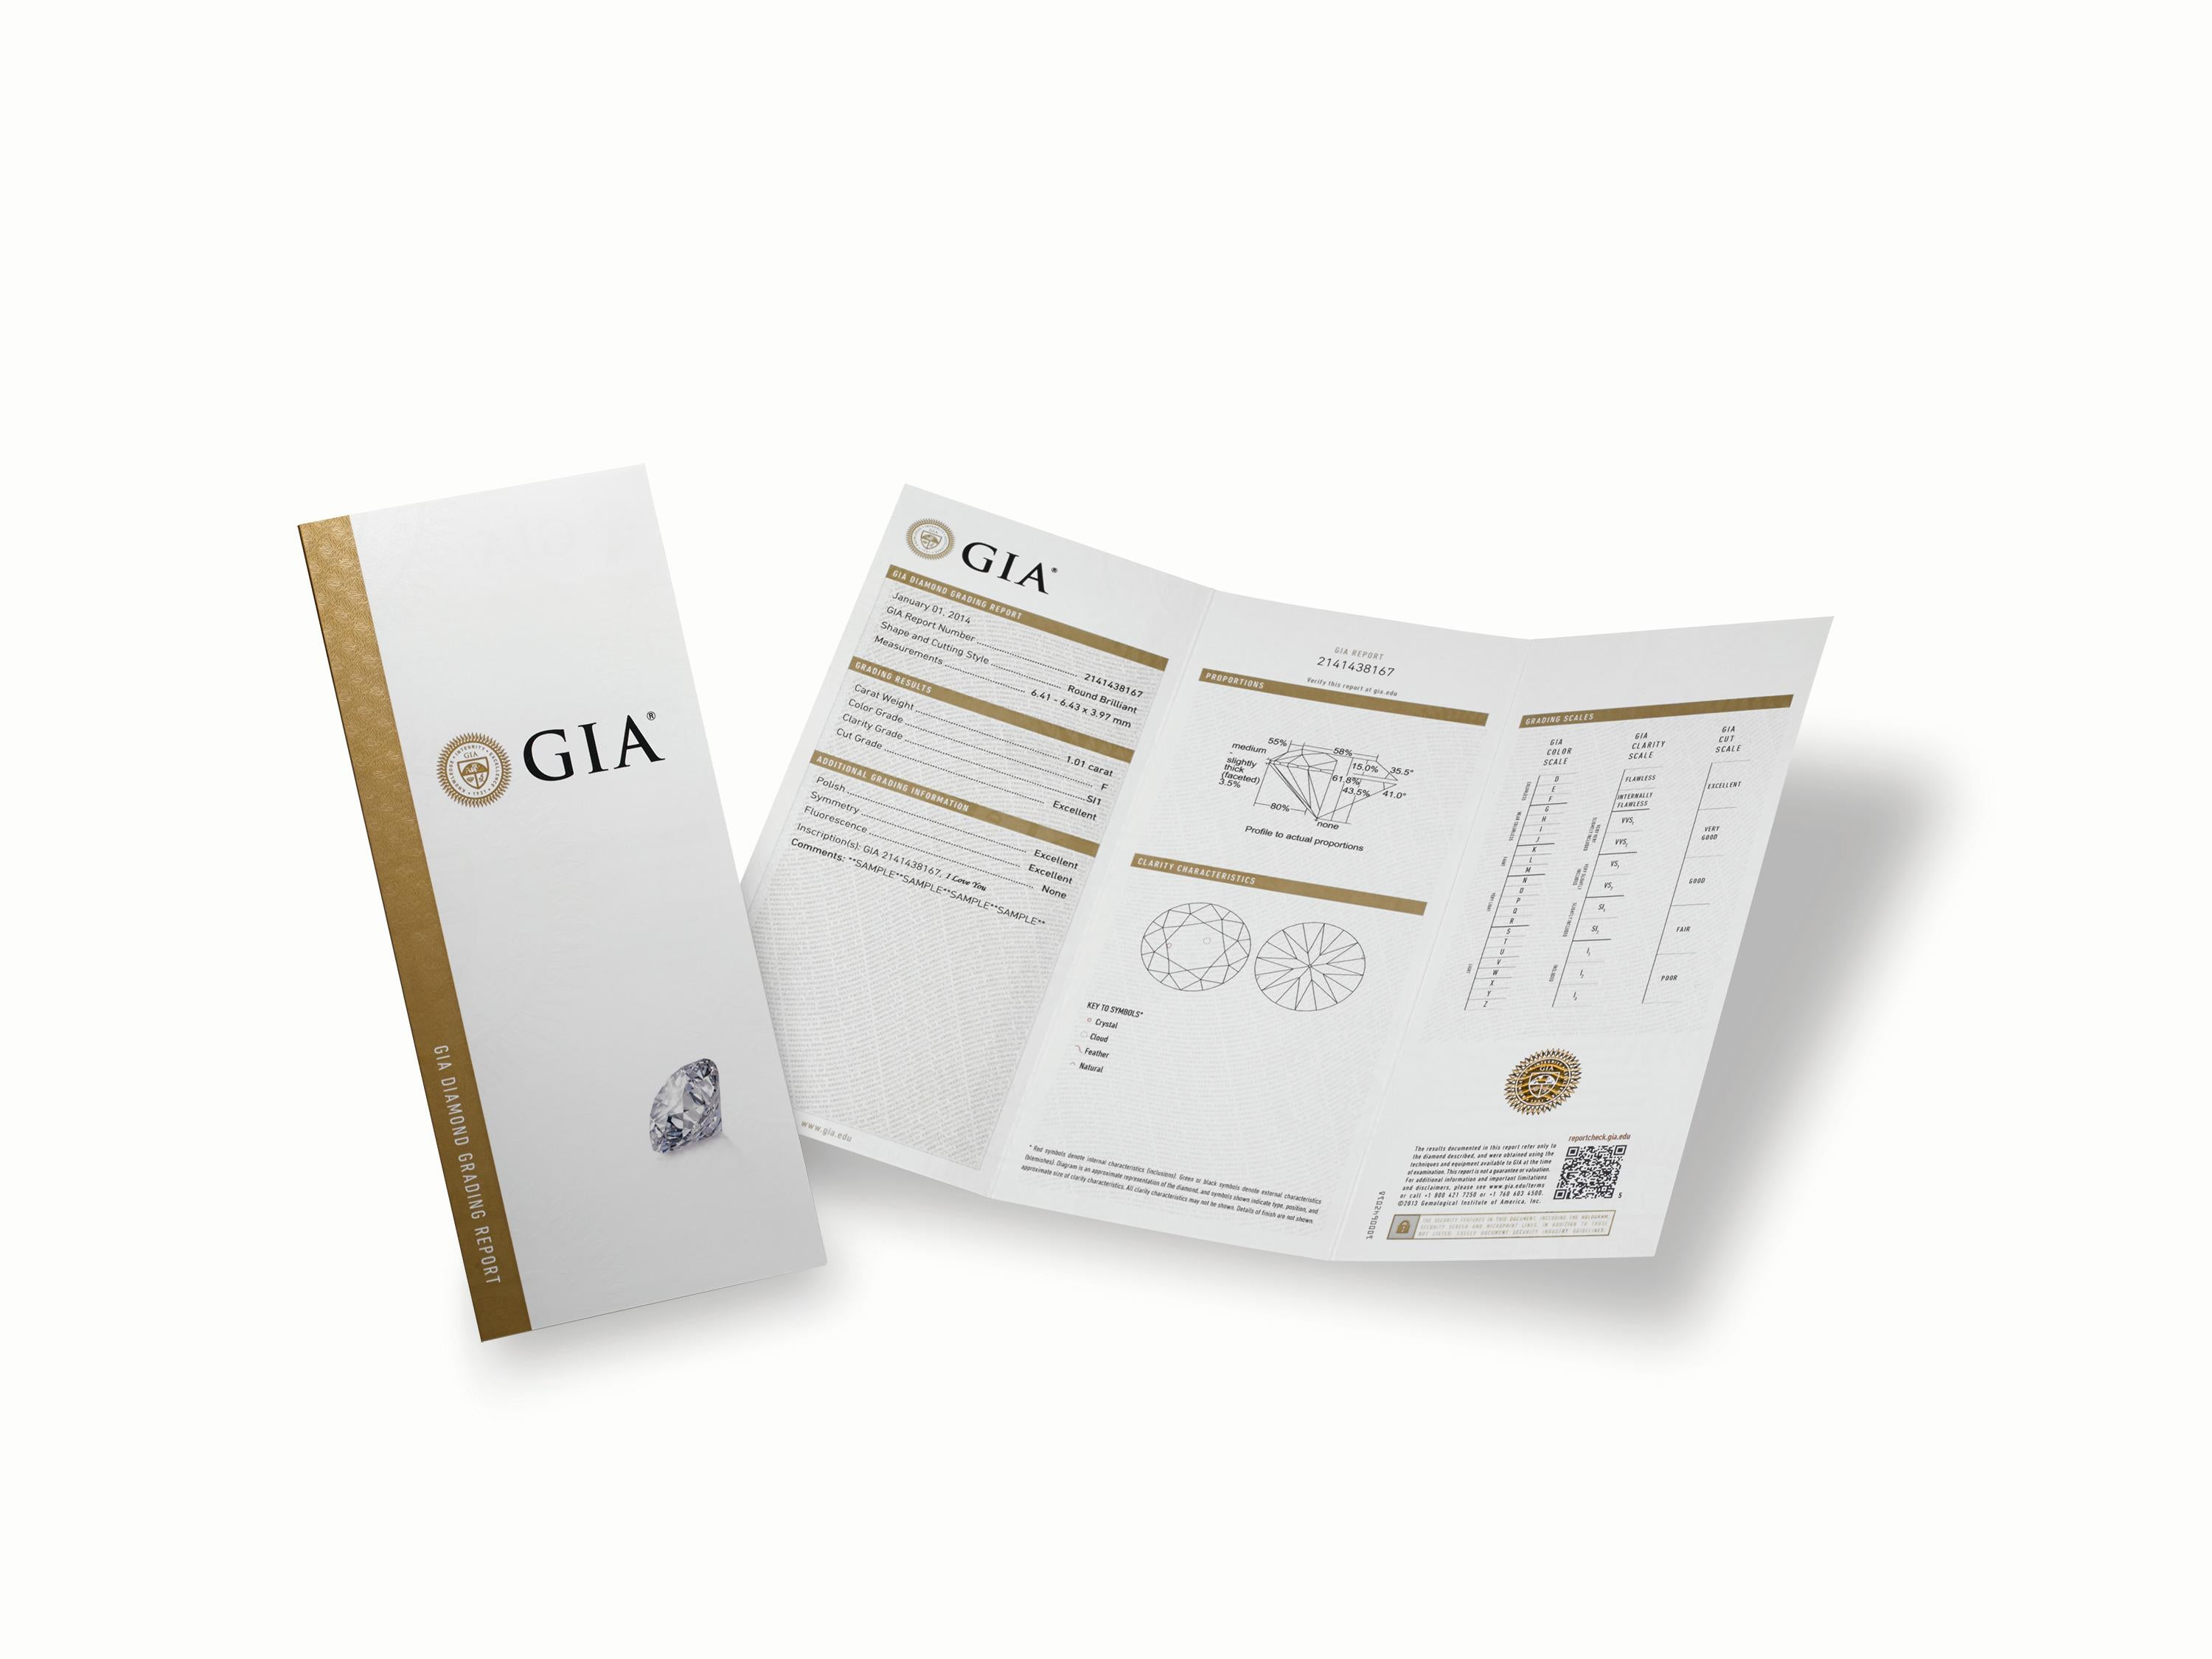 GIA Certified 2.00-2.05 Carat, G-F/VVS, Radiant Cut, Excellent Natural Diamond

Perfect Brilliants for perfect gifts.

5 C's:
Certificate: GIA
Carat: 2.00-2.05ct
Color: G-F
Clarity: VVS2-VVS1(Very Very Slightly Included)
Cut: Very Good -